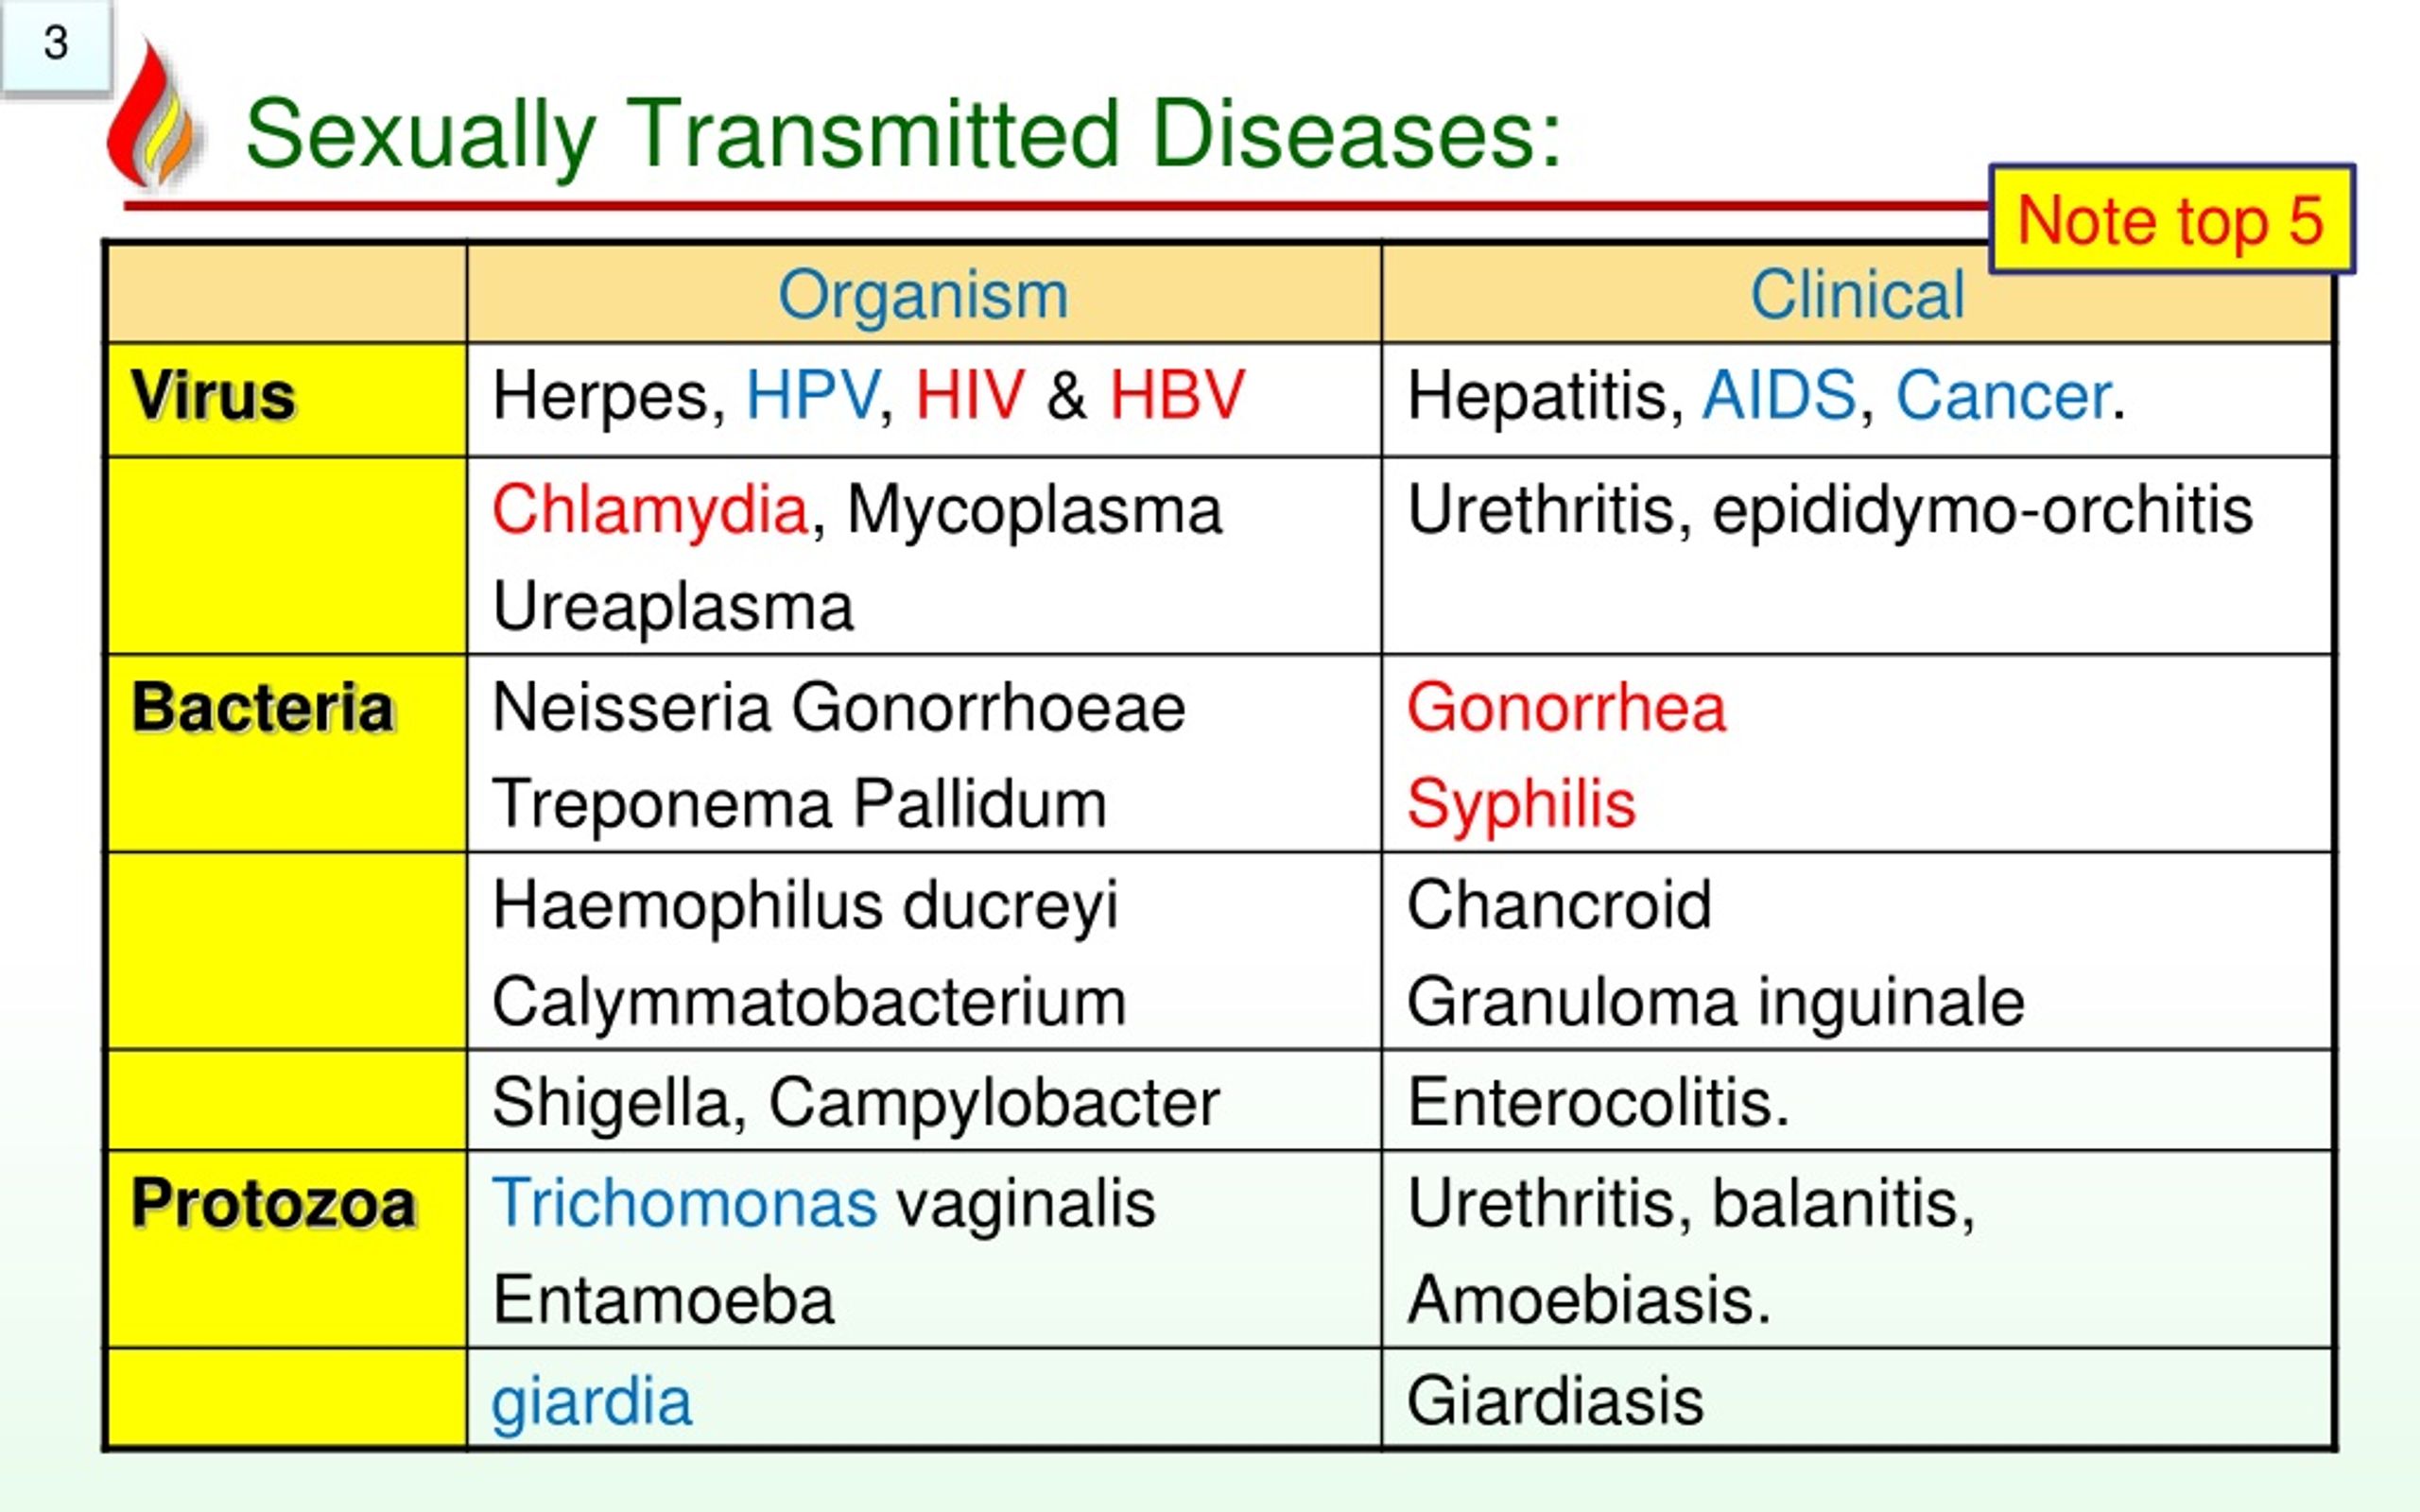 Ppt Pathology Of Std Sexually Transmitted Disorders Powerpoint Presentation Id 8201959